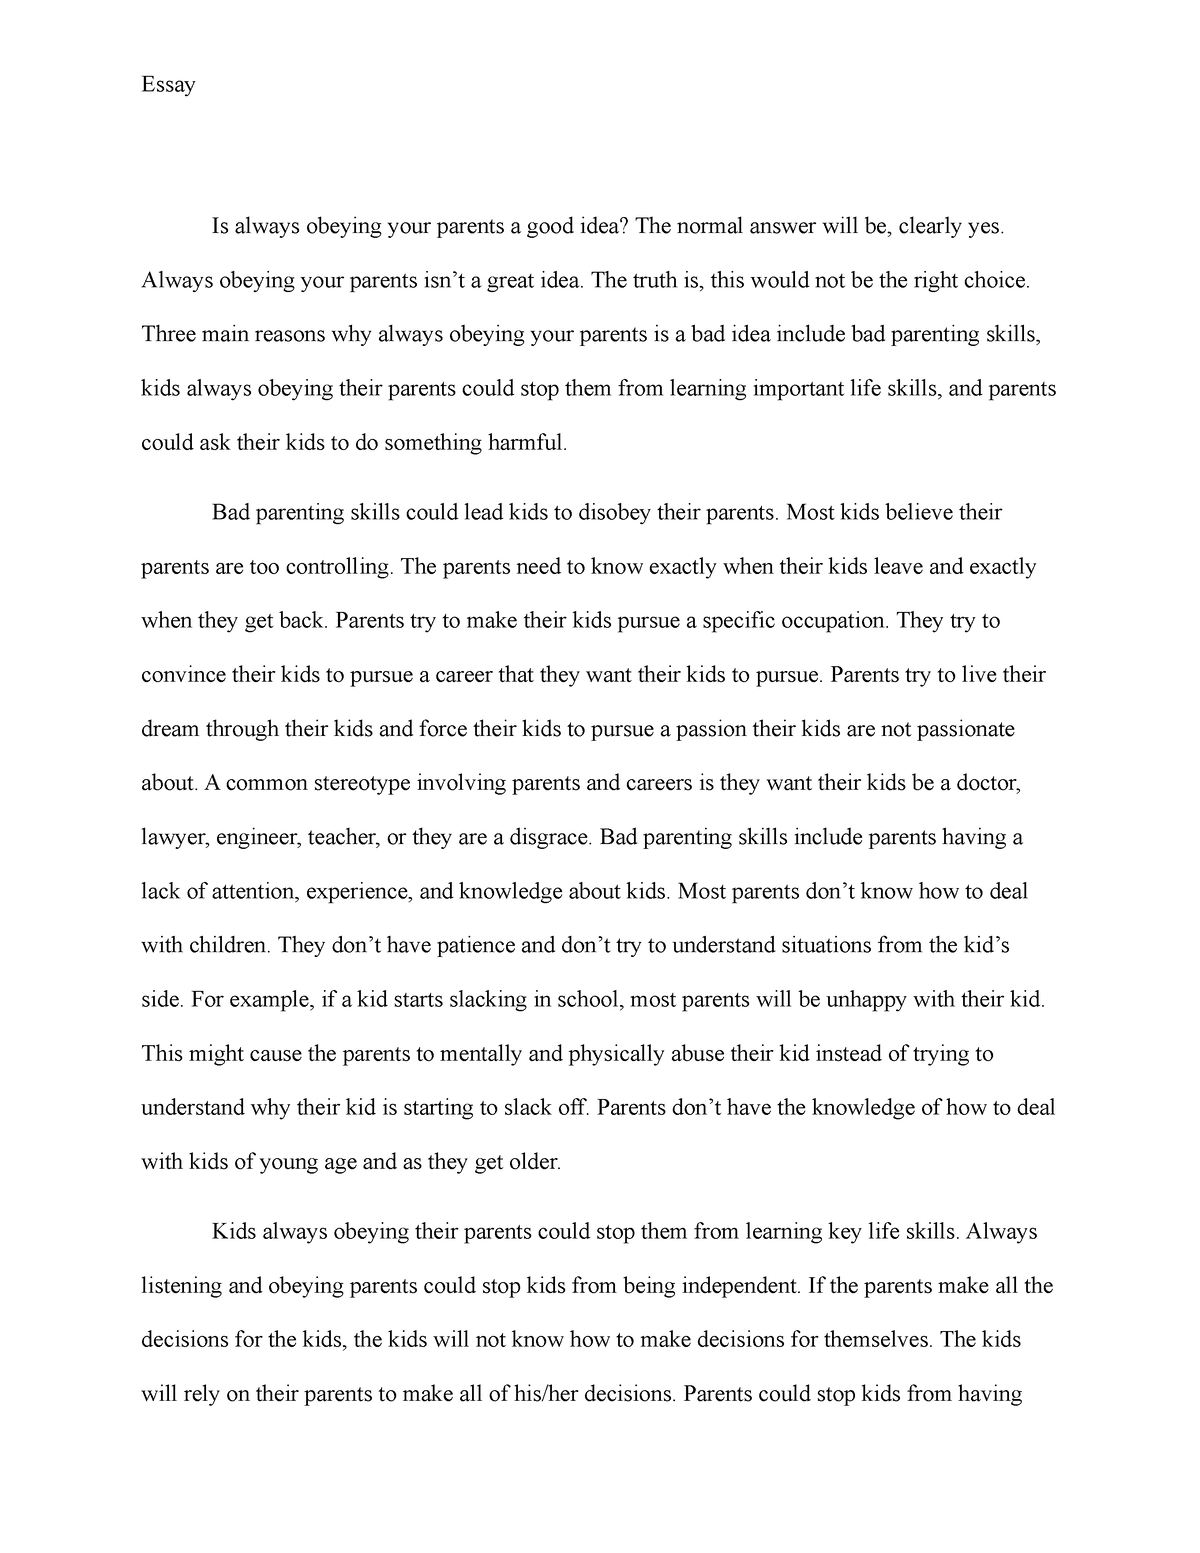 essay about disobeying parents